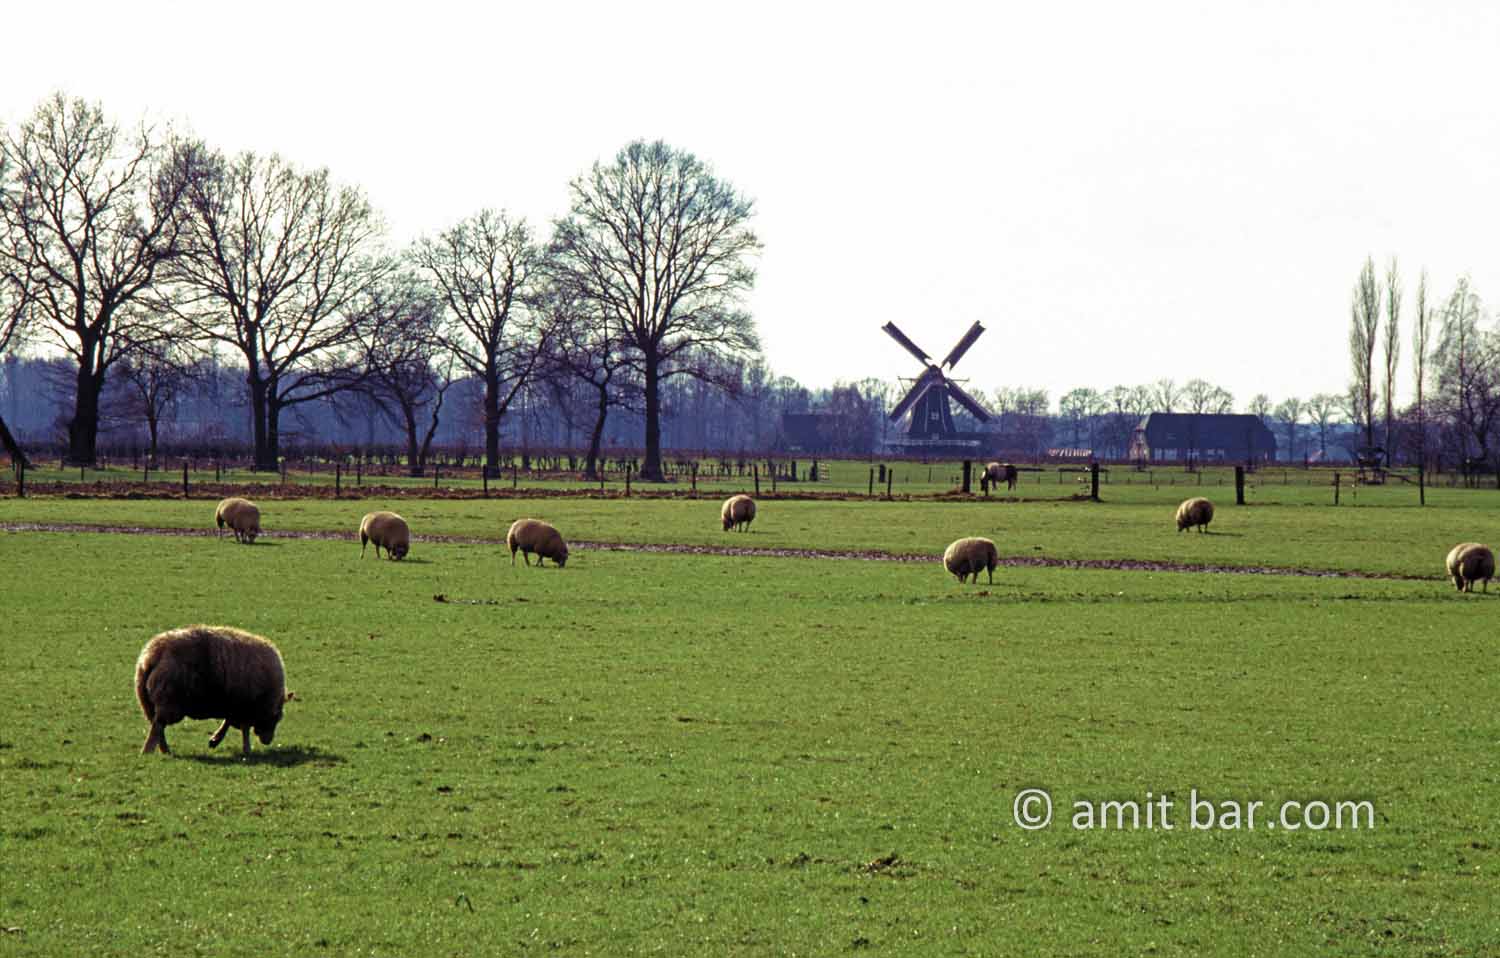 Sheeps and windmill. Sheeps are grazing while turning windmilll is seen at Doetinchem, The Netherlands